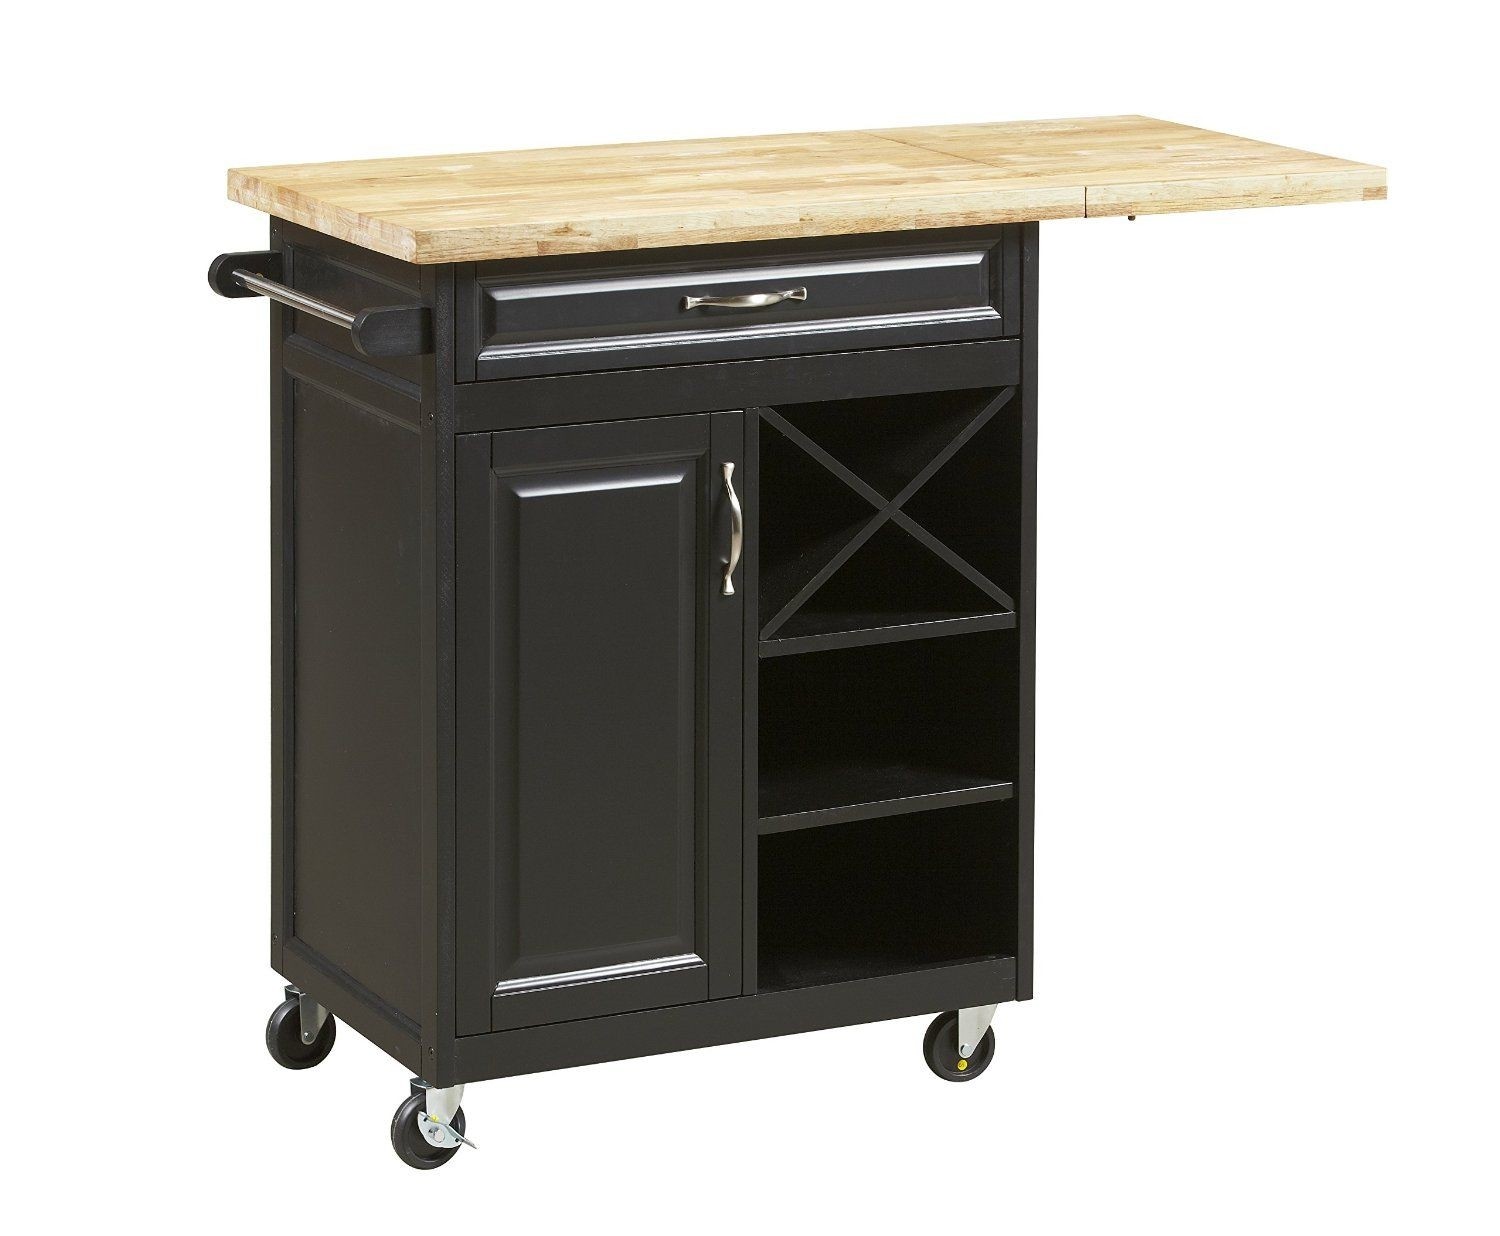 New Visions by Lane Kitchen Island with Butcher Block Top